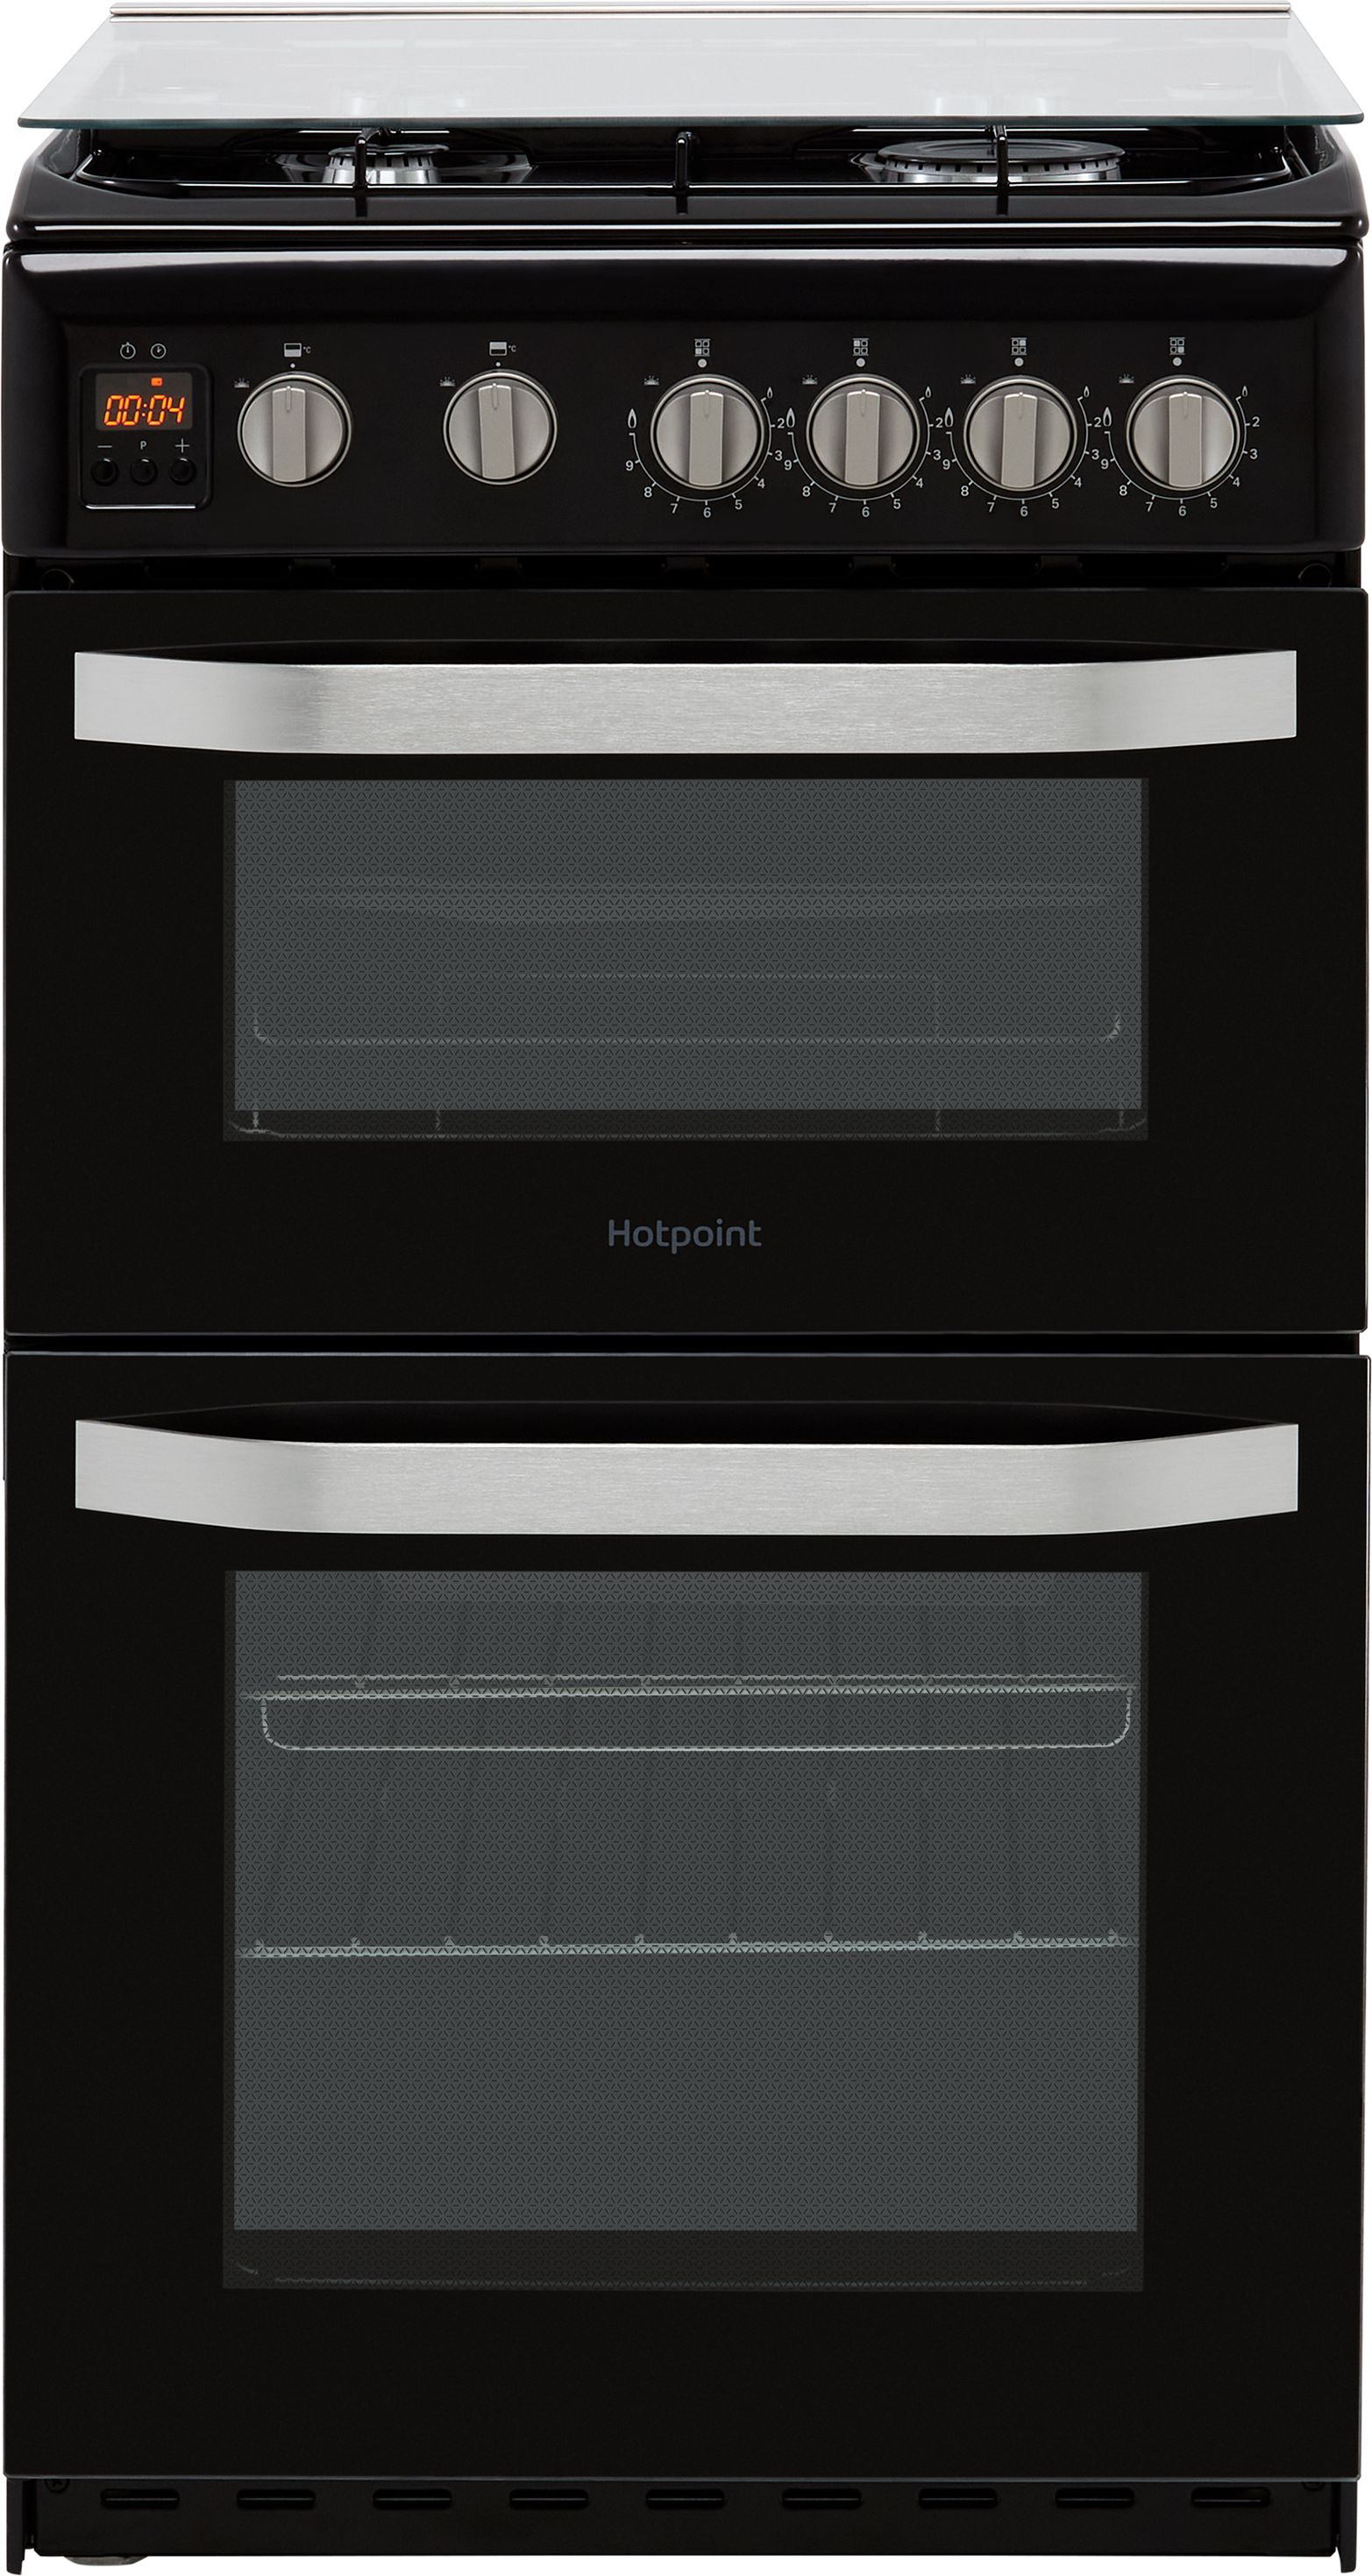 Hotpoint HD5G00CCBK/UK 50cm Freestanding Gas Cooker with Full Width Gas Grill - Black - A+/A Rated, Black